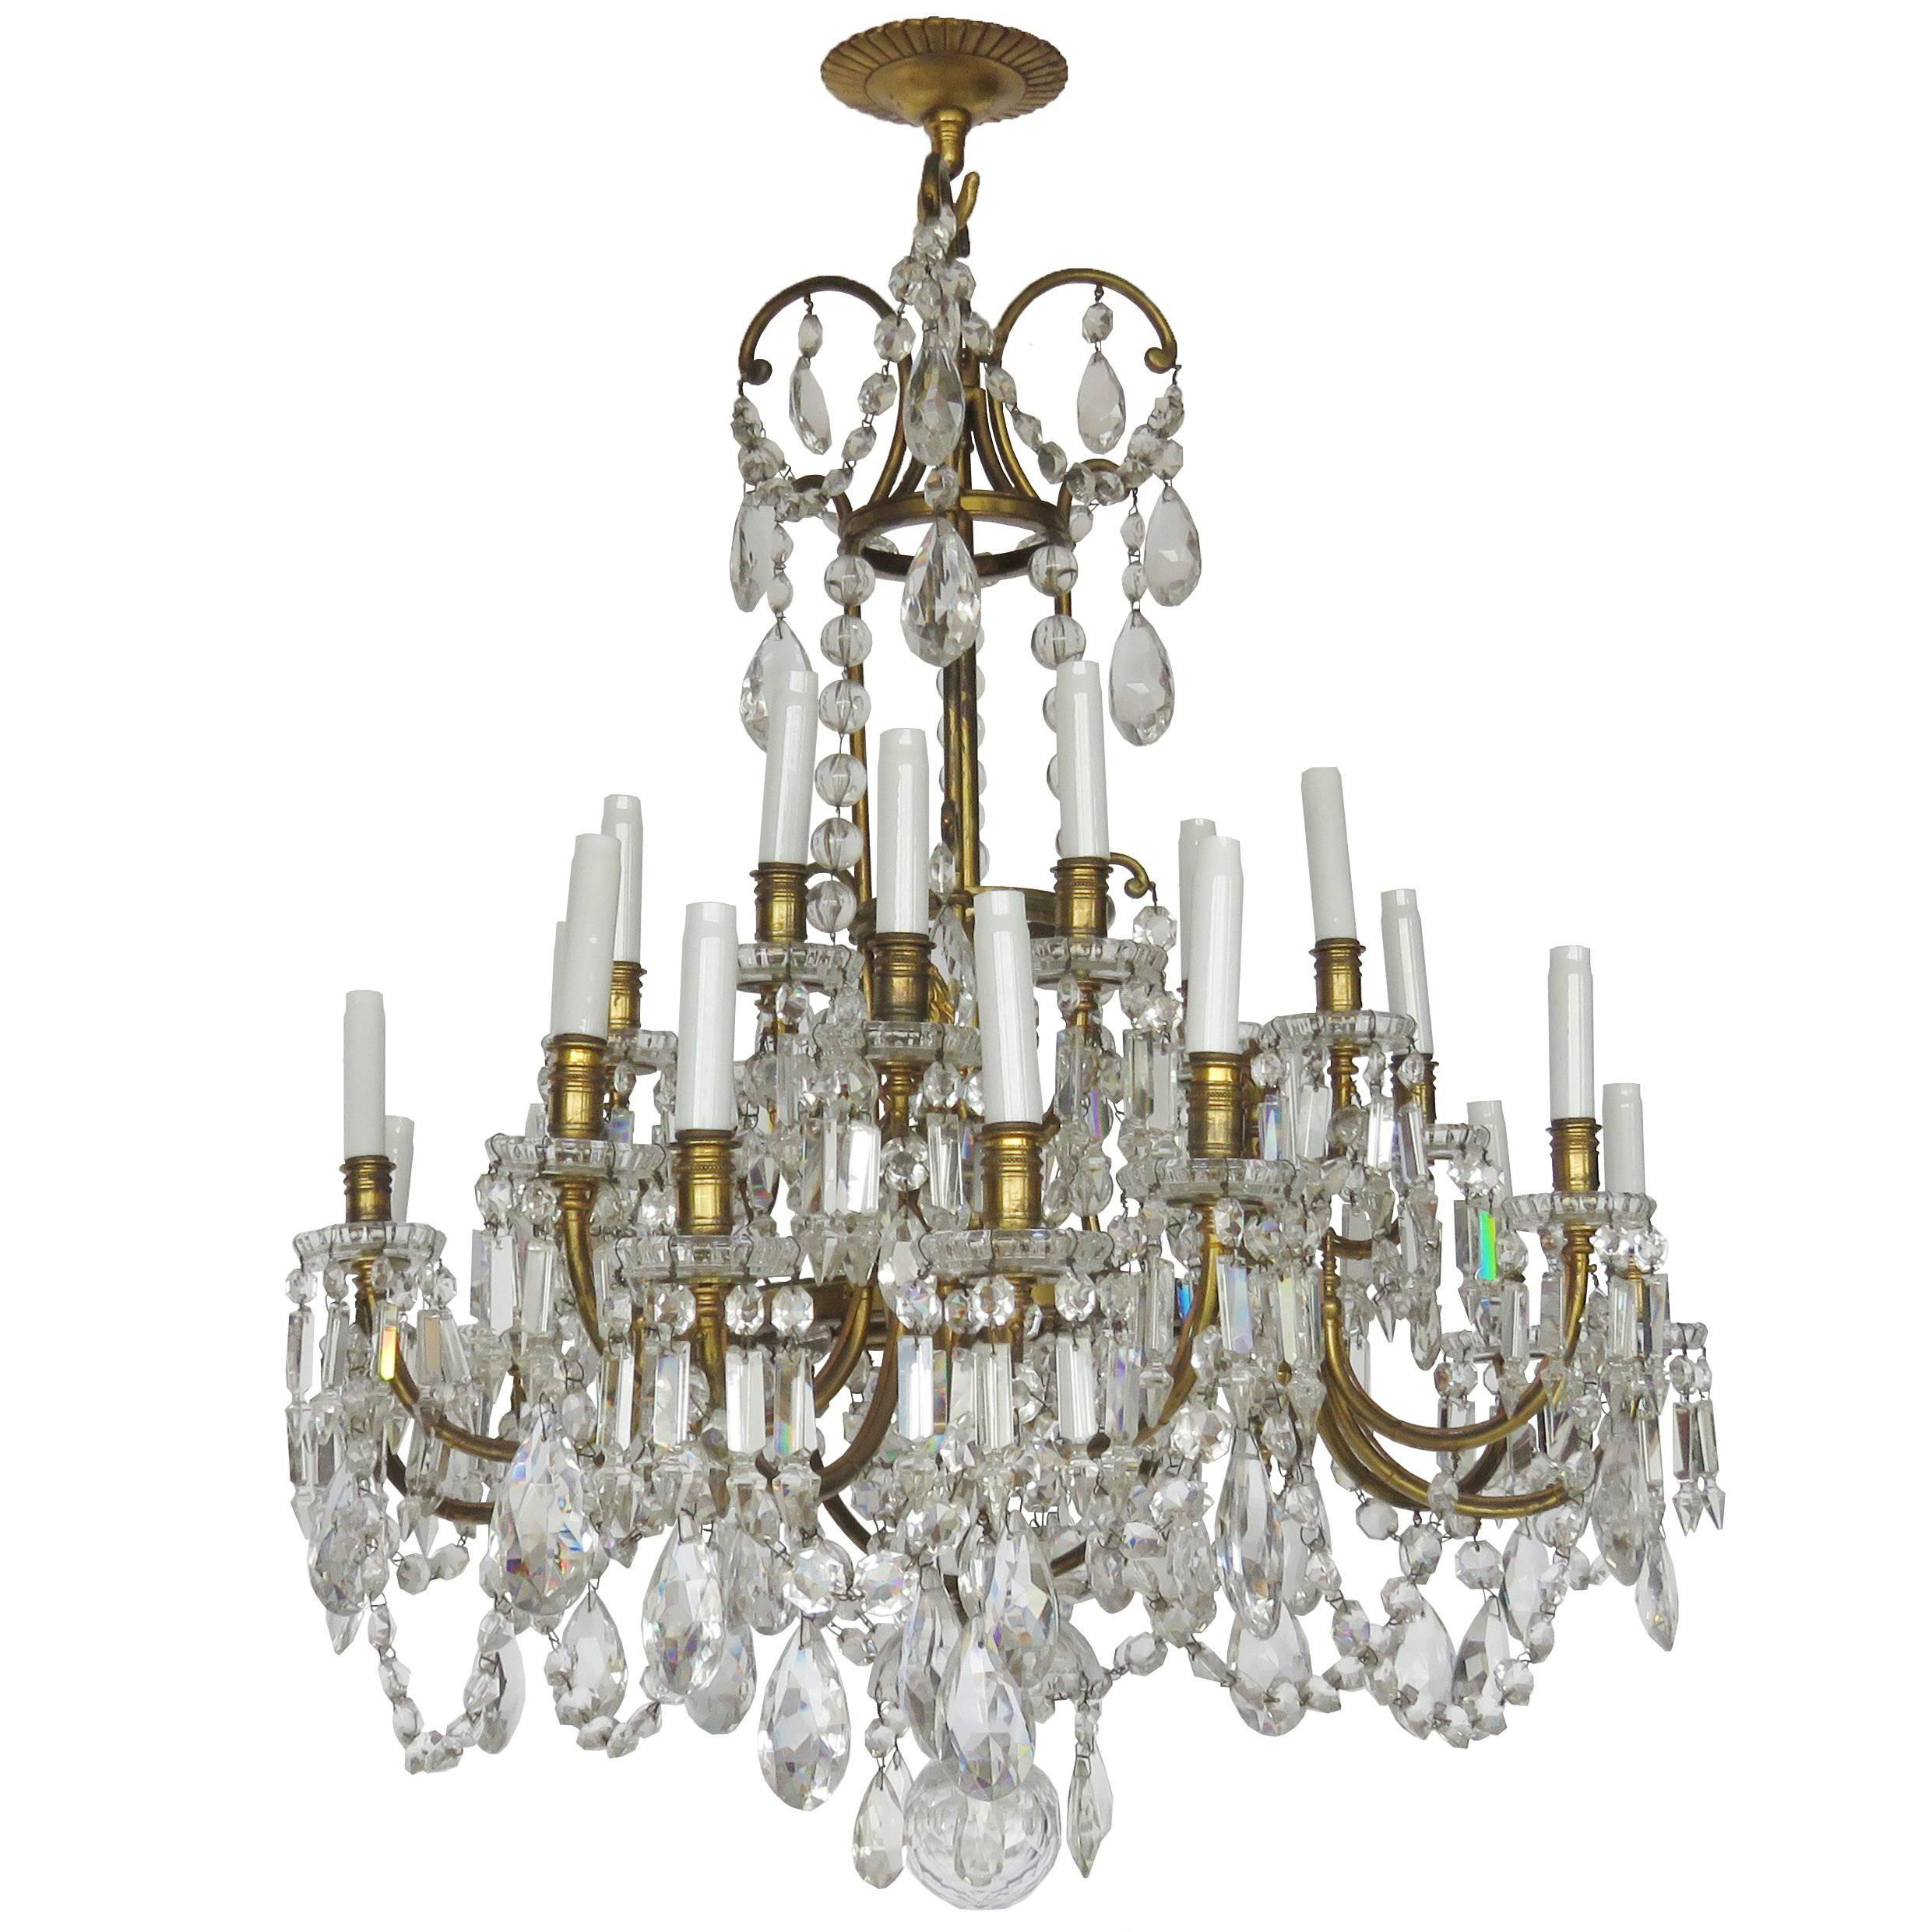 19th Century Baccarat Bronze and Glass Chandelier, 21 Lights